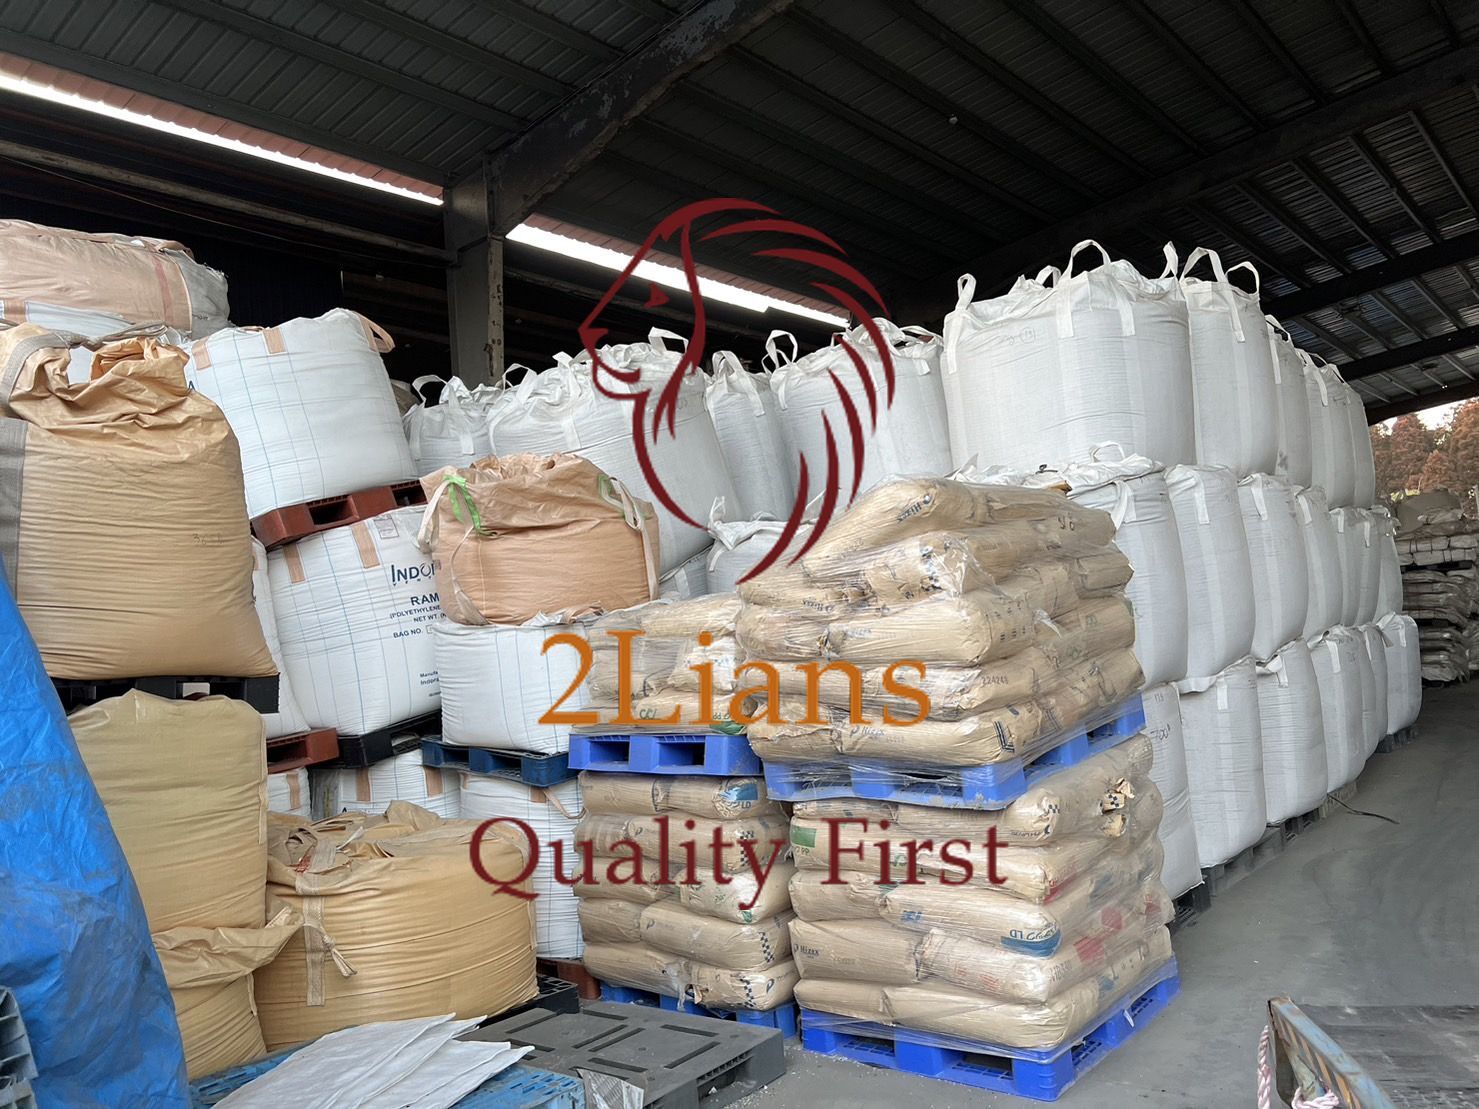 LLDPE film on bales